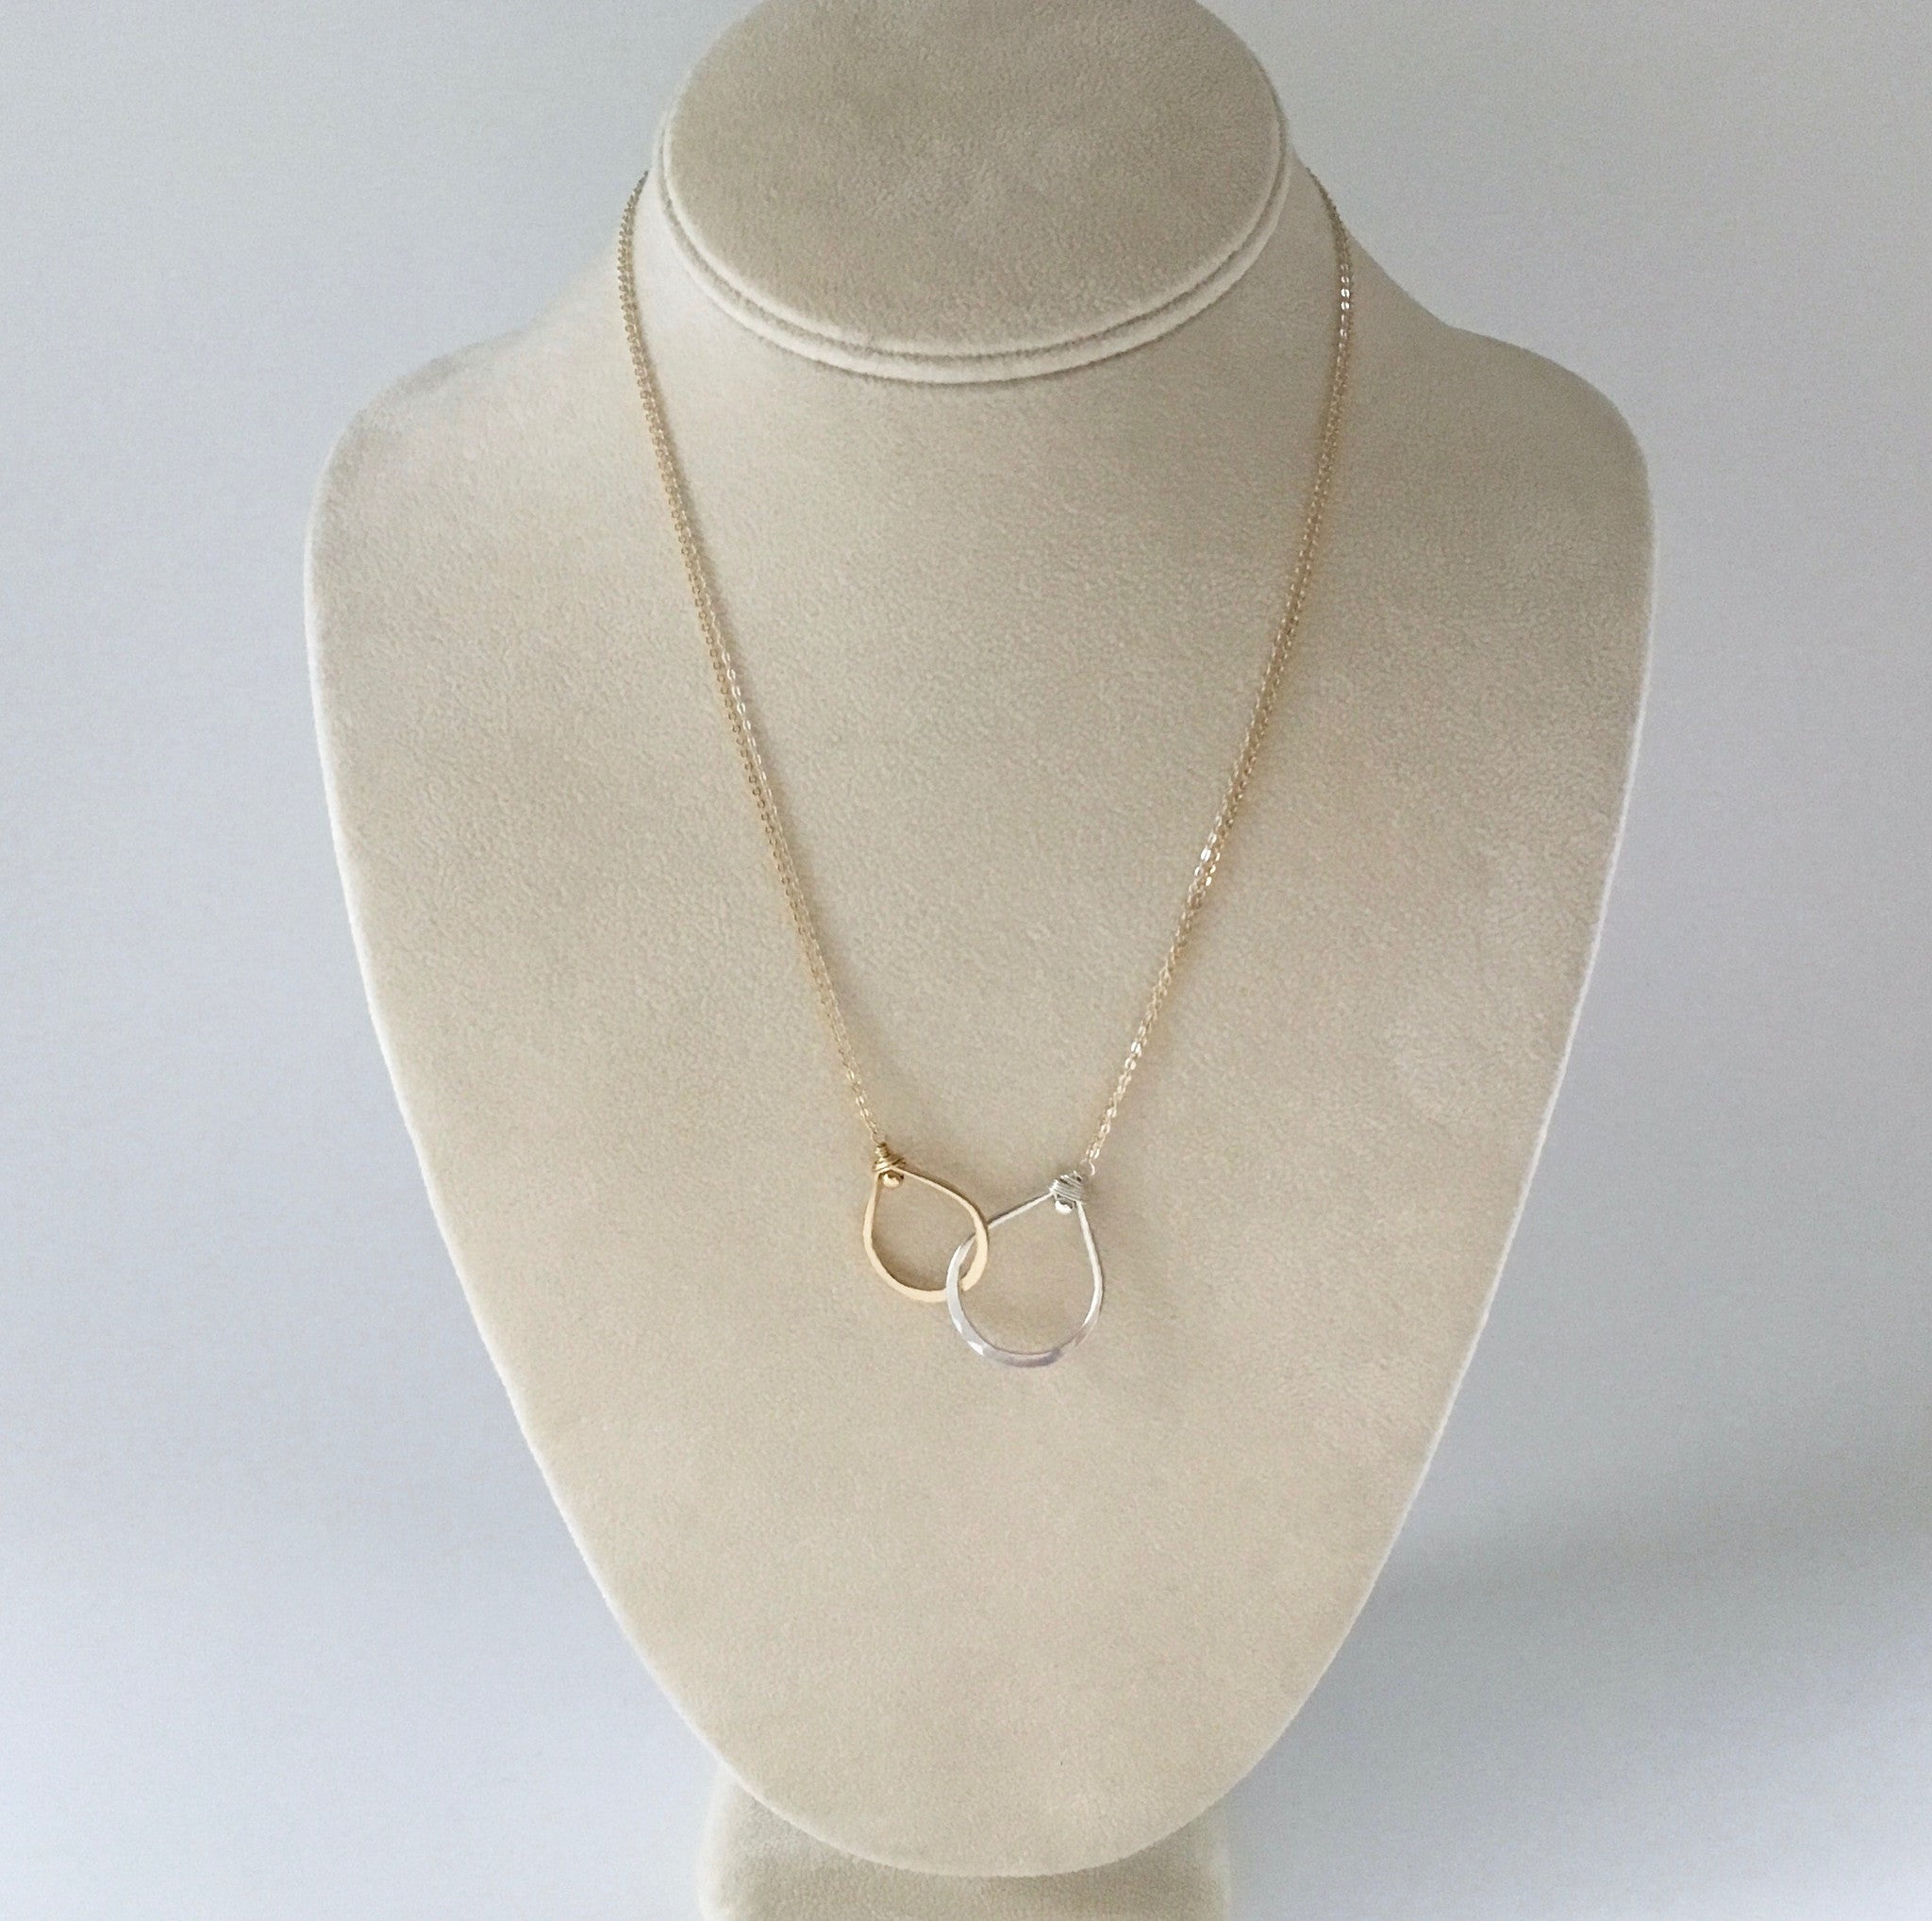 United Necklace, handmade gold filled and sterling jewelry